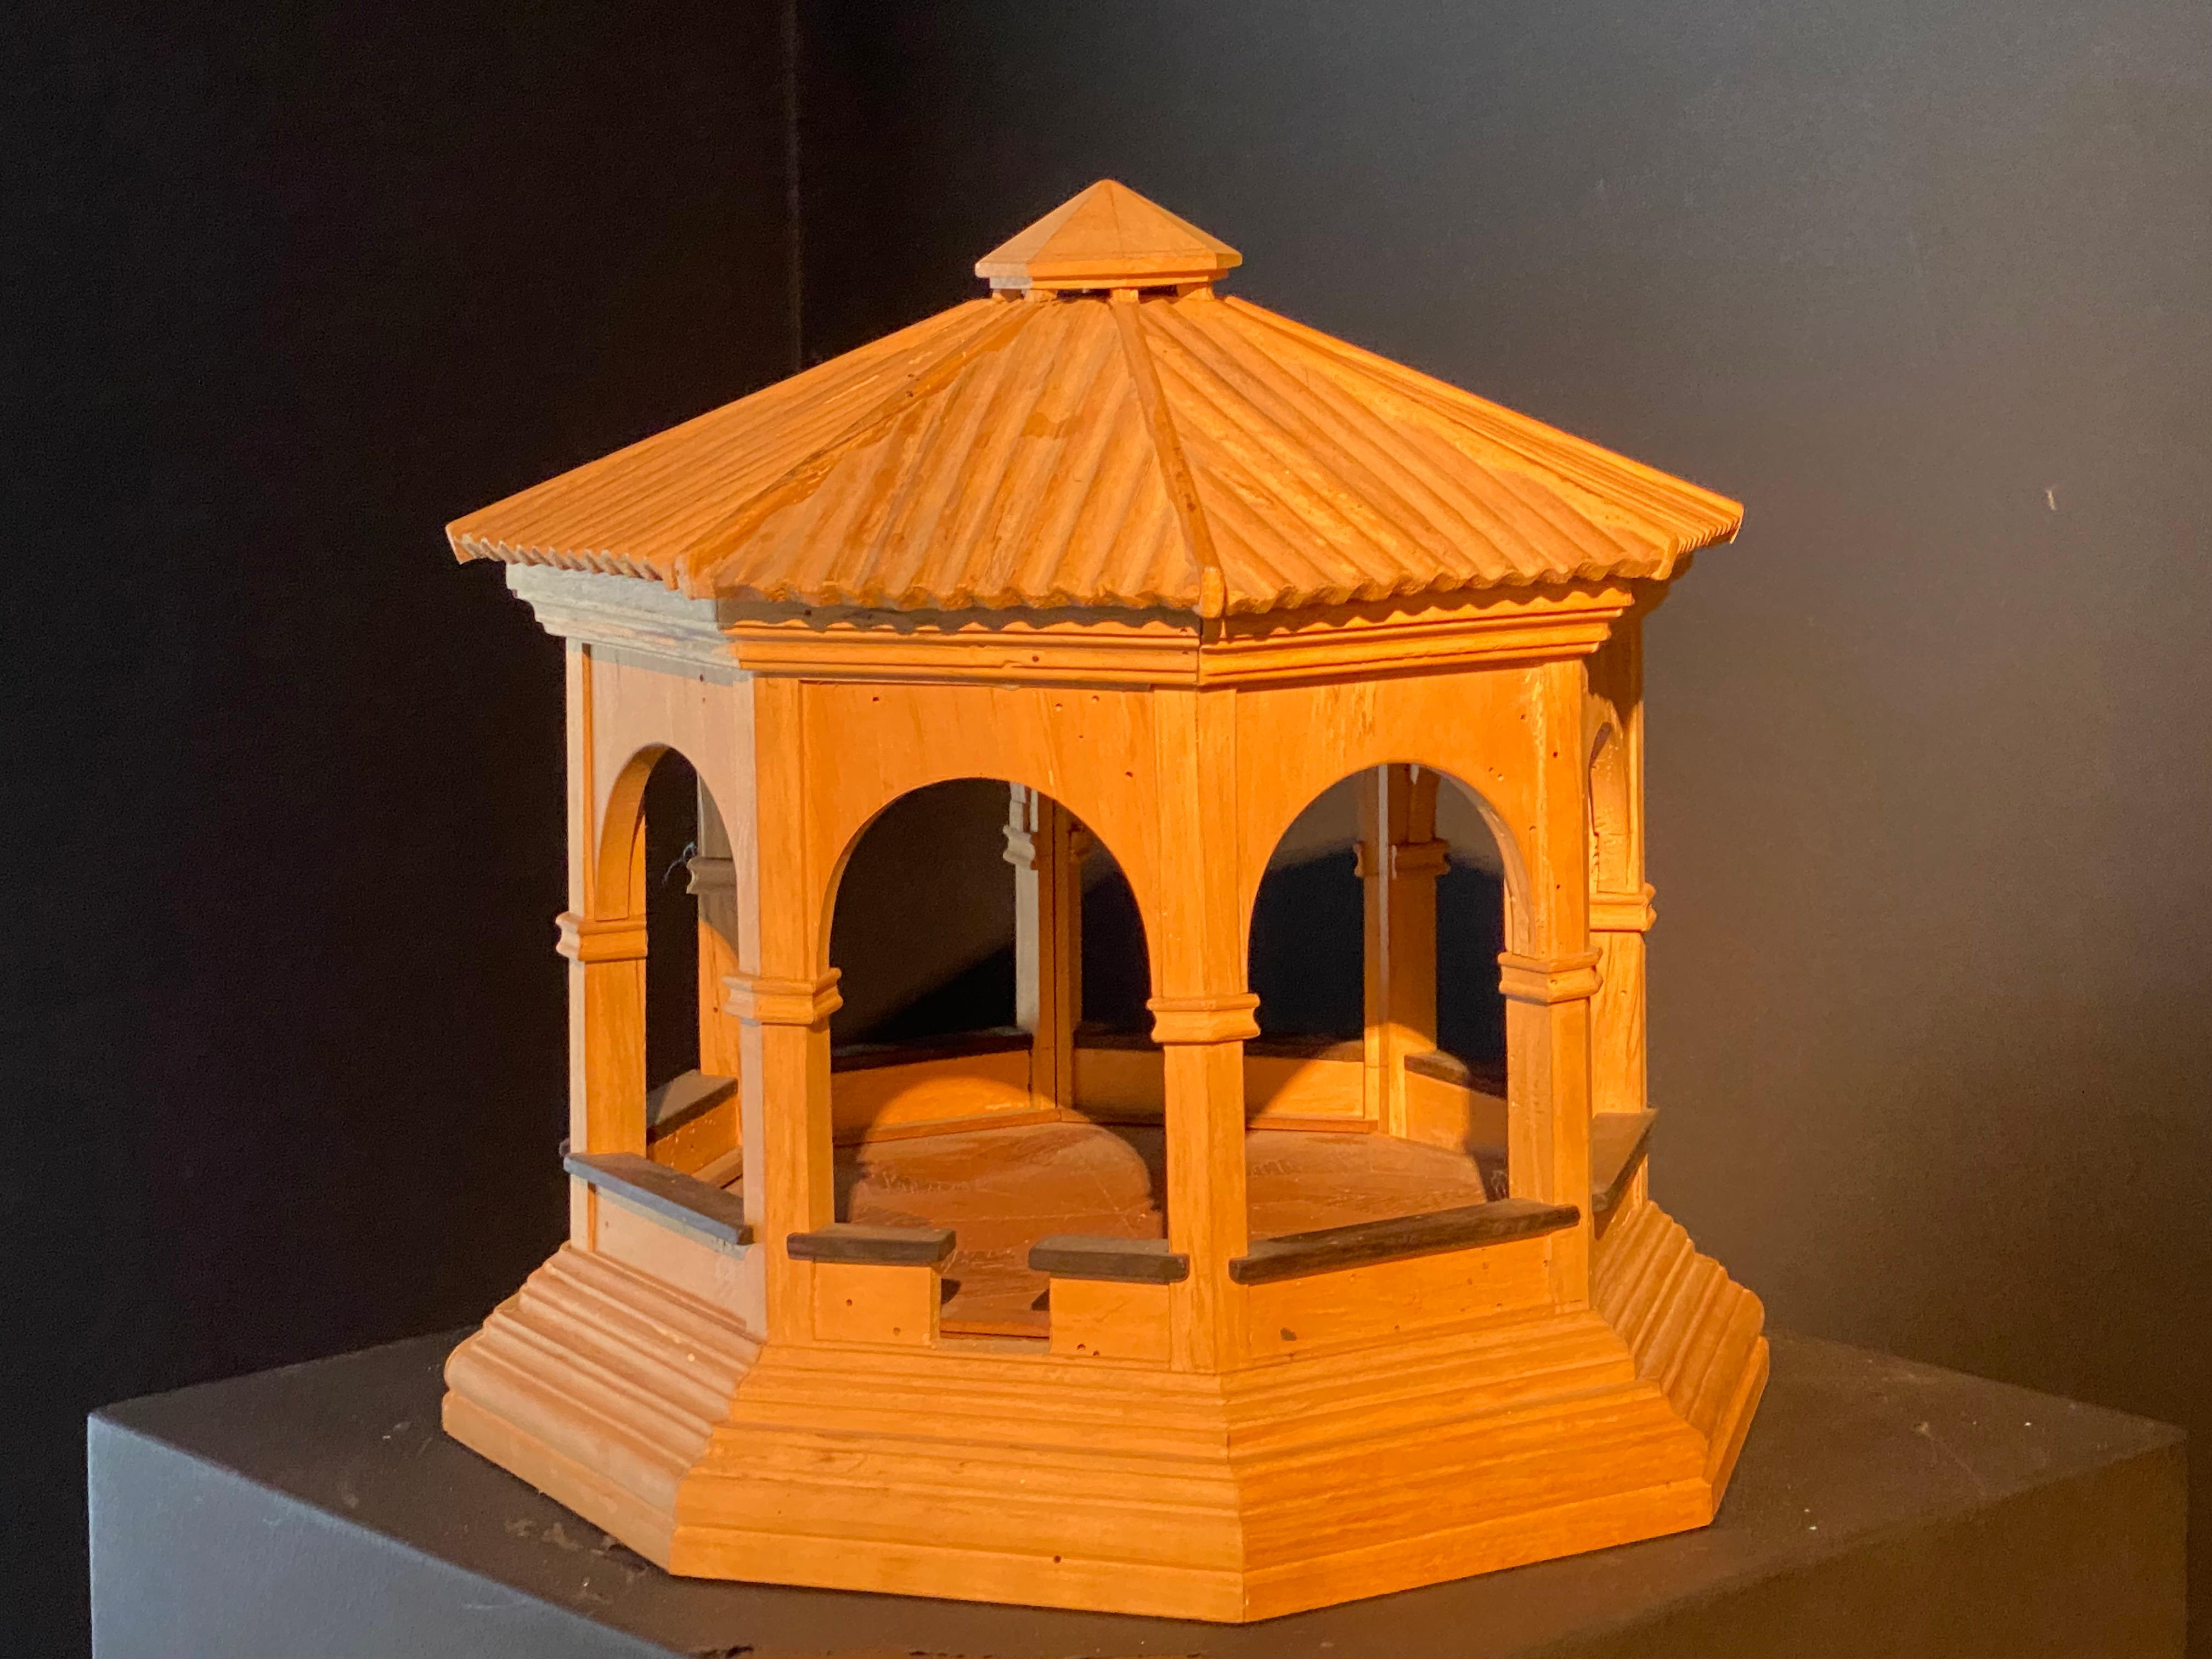 Late 20th Century Small Wooden Vintage Architects Model of a Wooden Kiosk